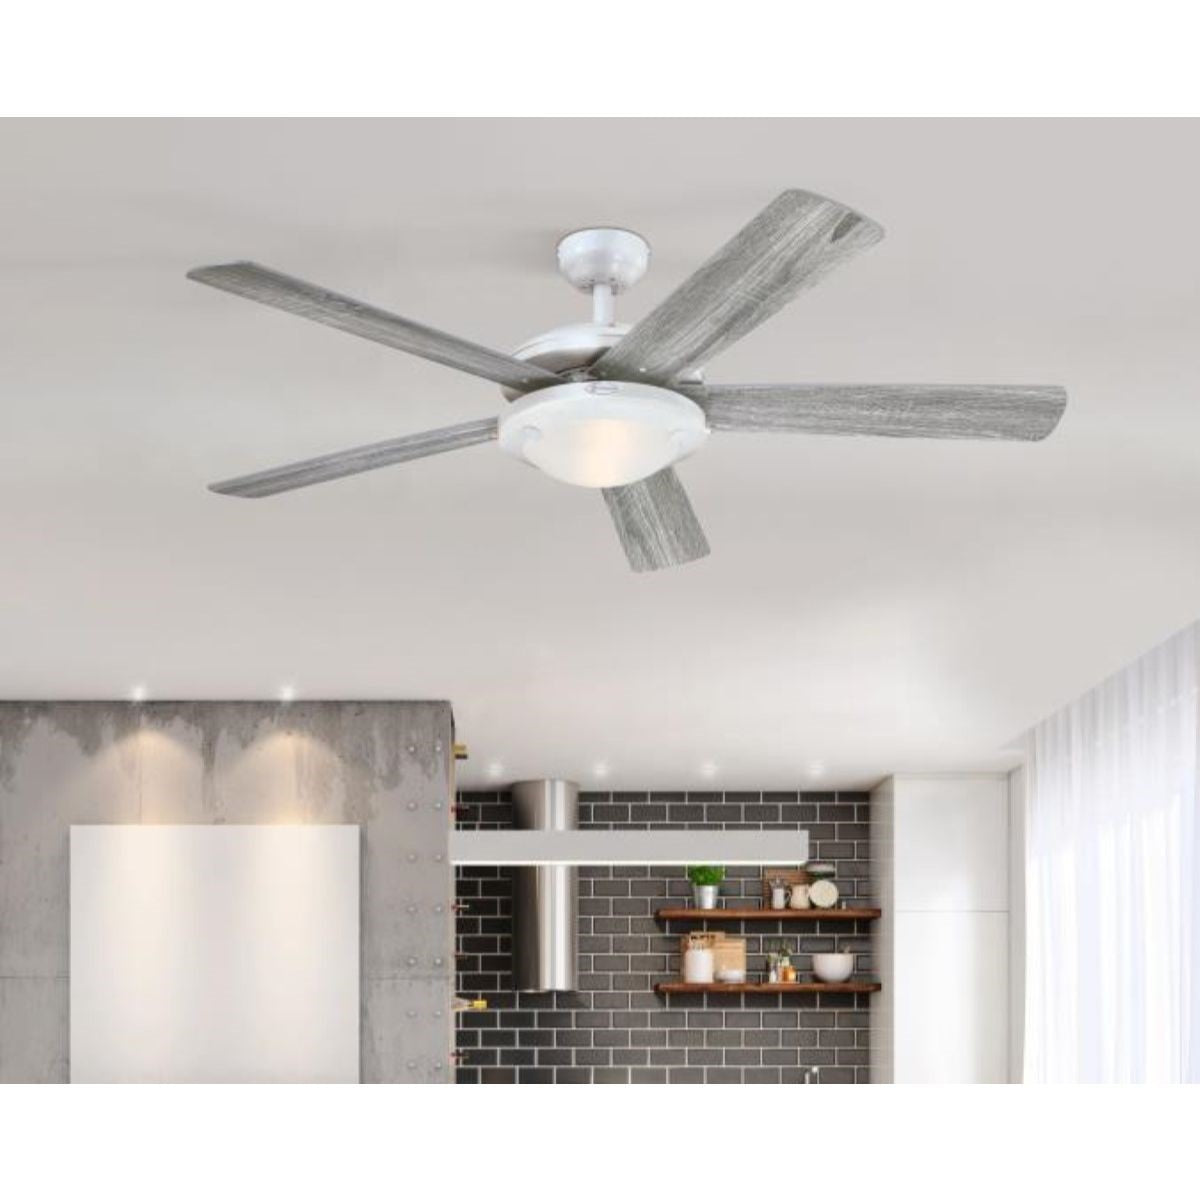 Comet 52 Inch Modern Ceiling Fan With Light And Pull Chain